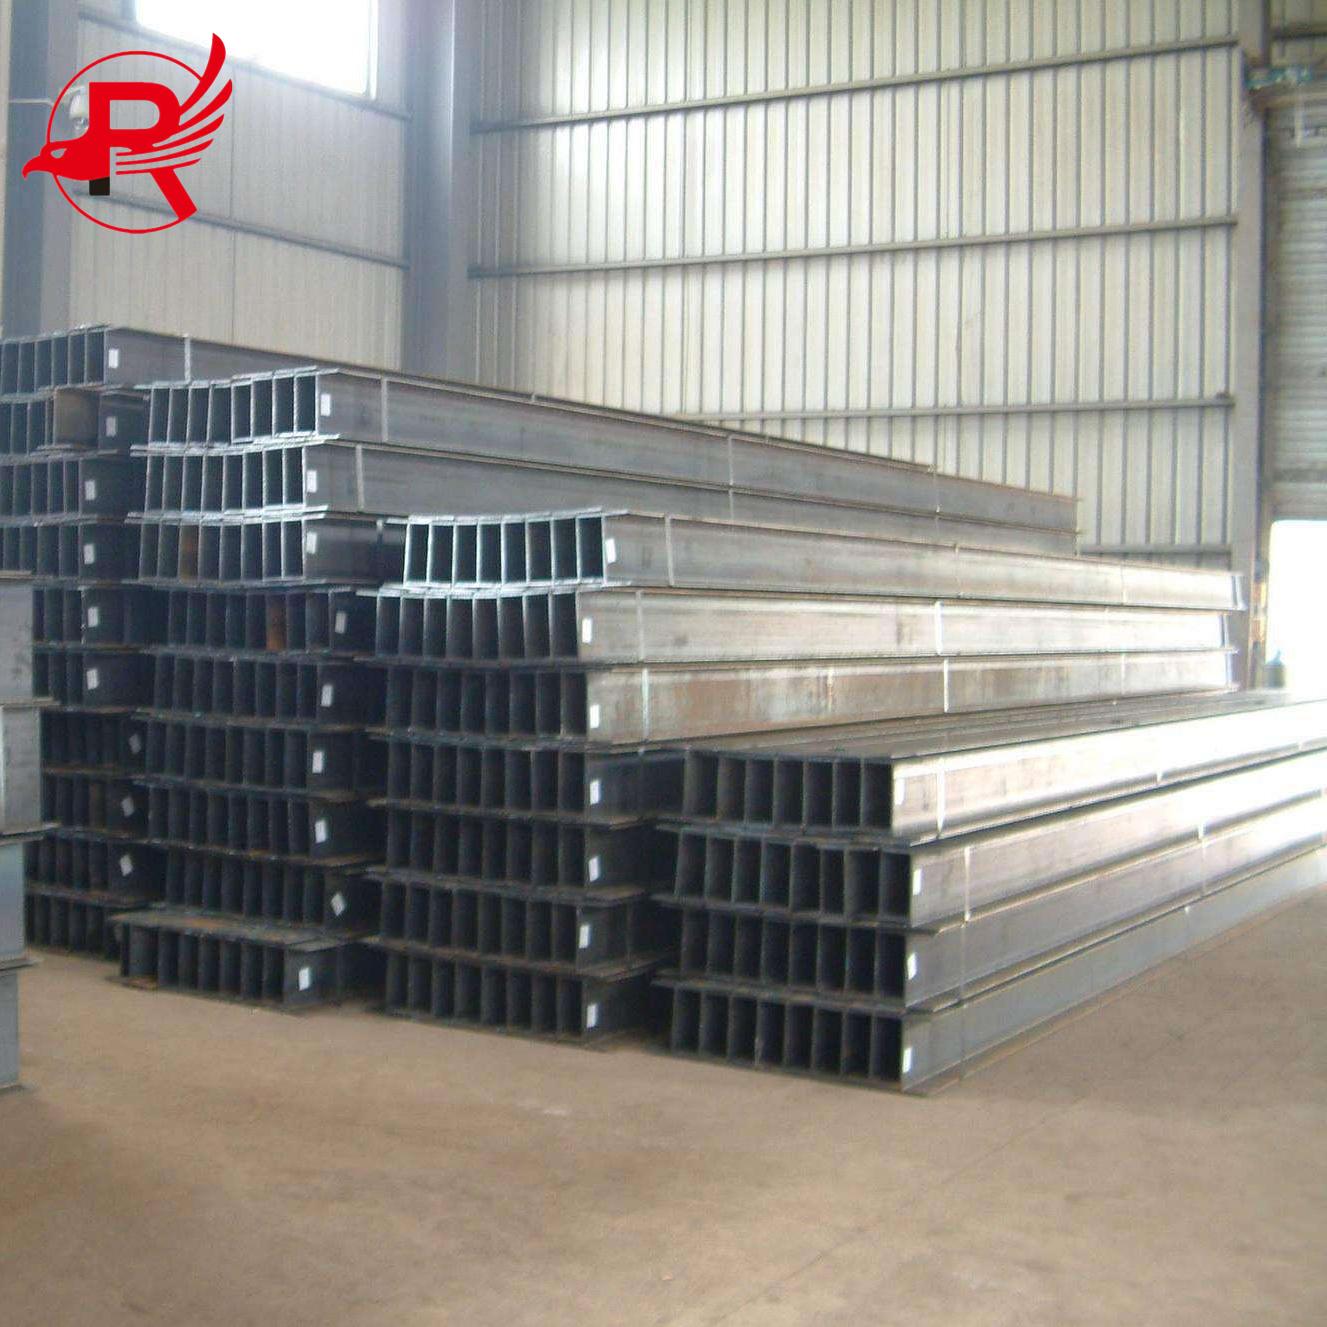 Hot Rolled H Pile H-shaped Steel Beam 100x100 / 200x200mm for Structural Engineering and Steel Pile Construction